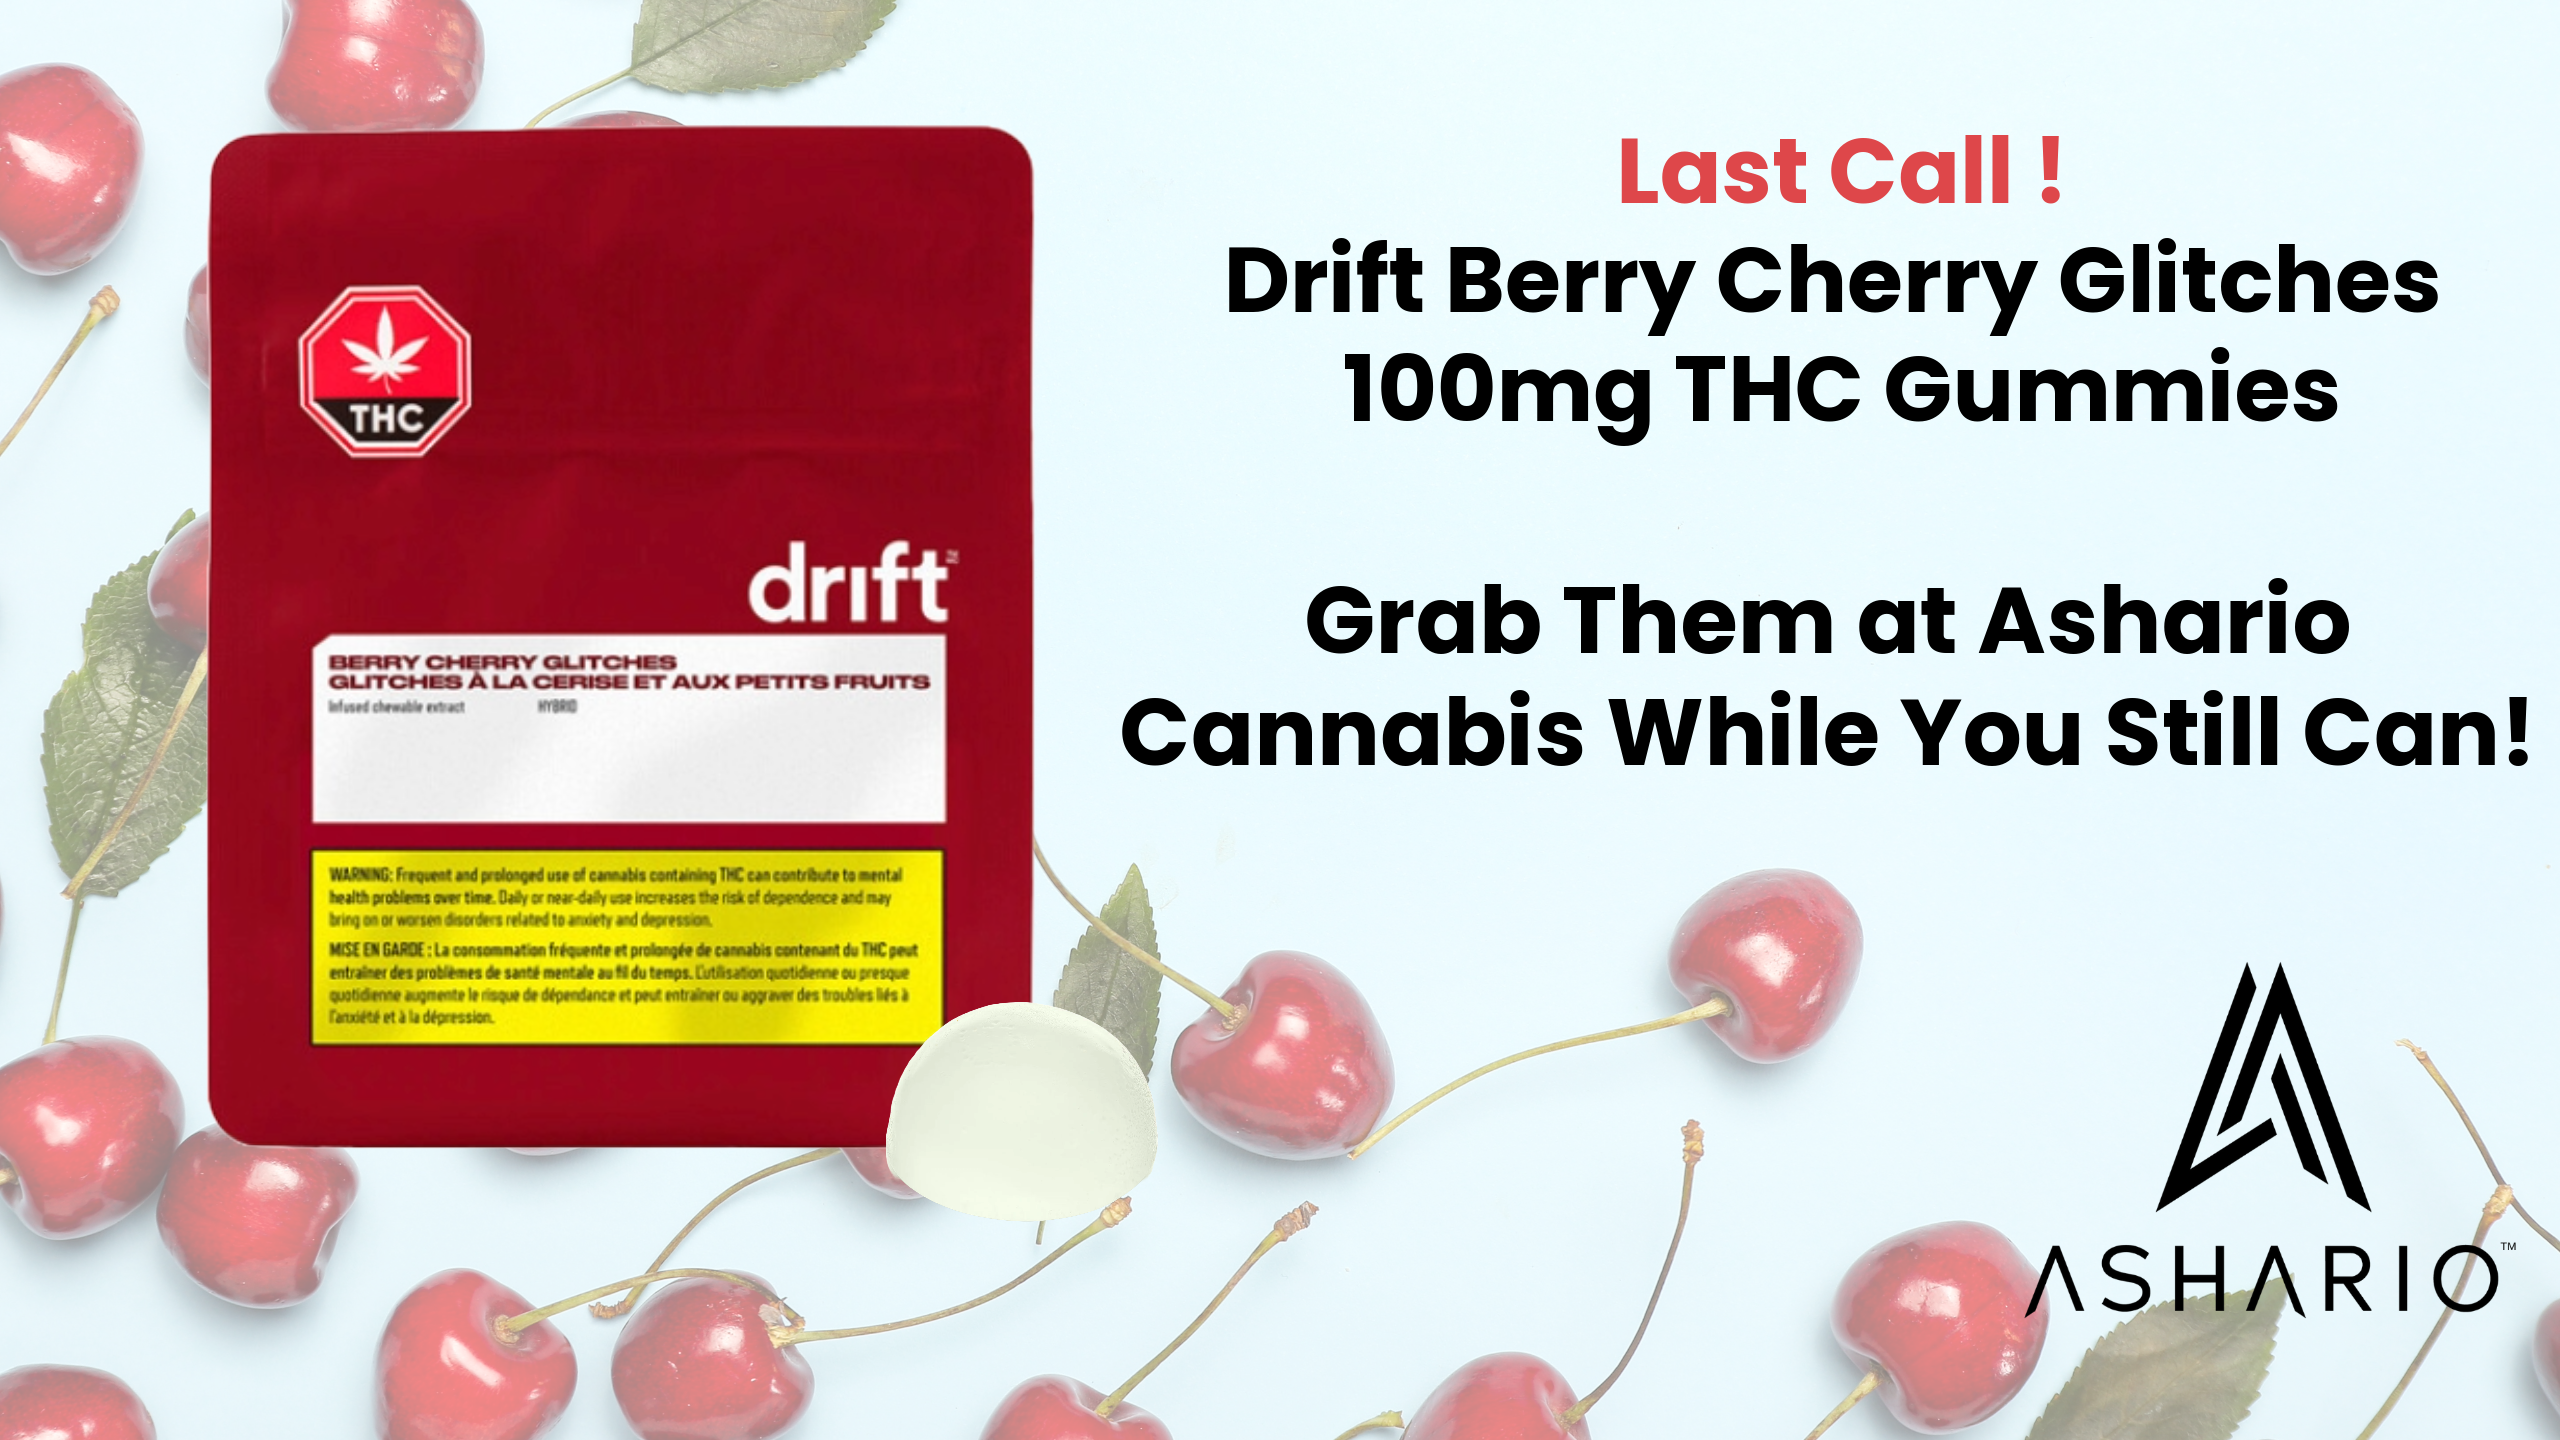 Hurry, because it's your last chance to grab a bag of Drift Berry Cherry Glitches 100mg THC gummies! Don't miss out on the opportunity to indulge in these delicious treats infused with the tantalizing flavors of berry and cherry.